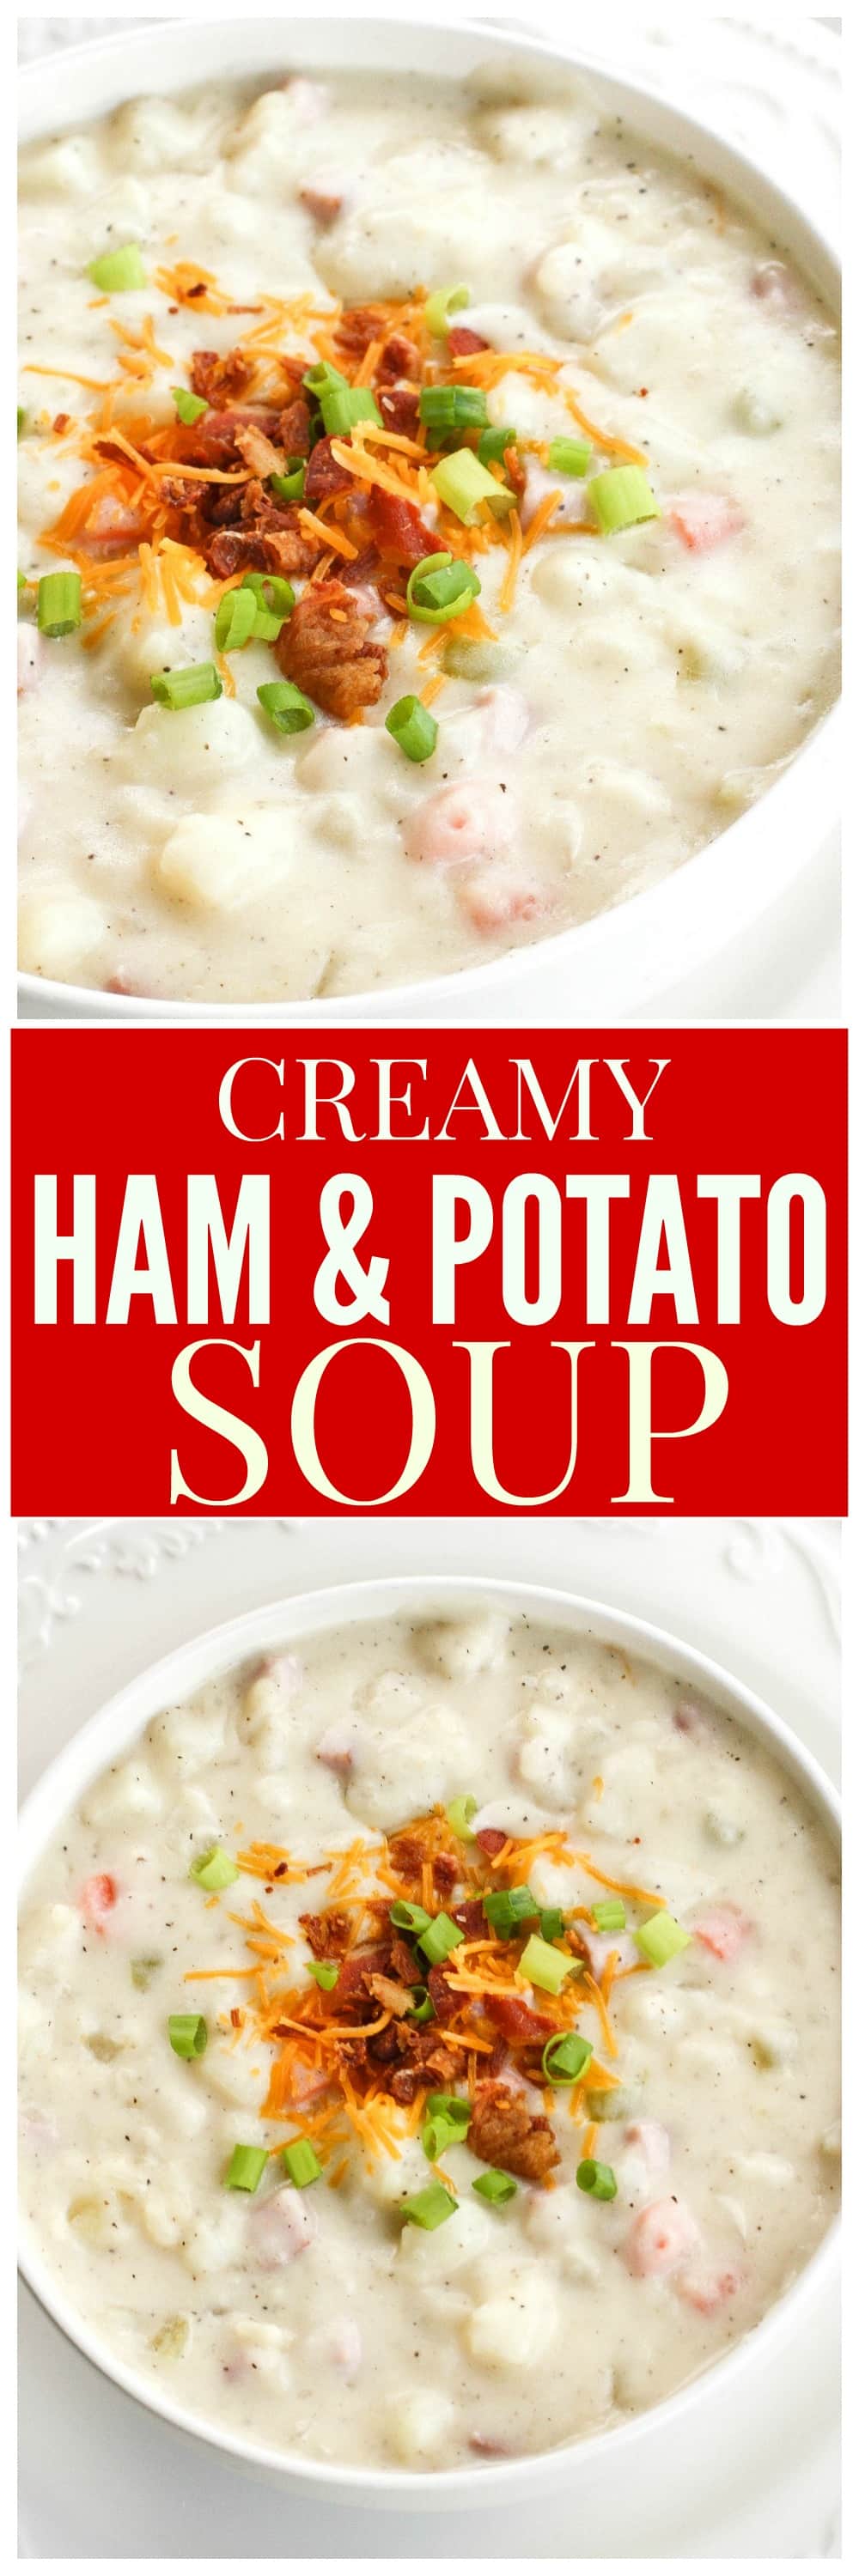 Ham and Potato Soup - so comforting and warm on a cold day!